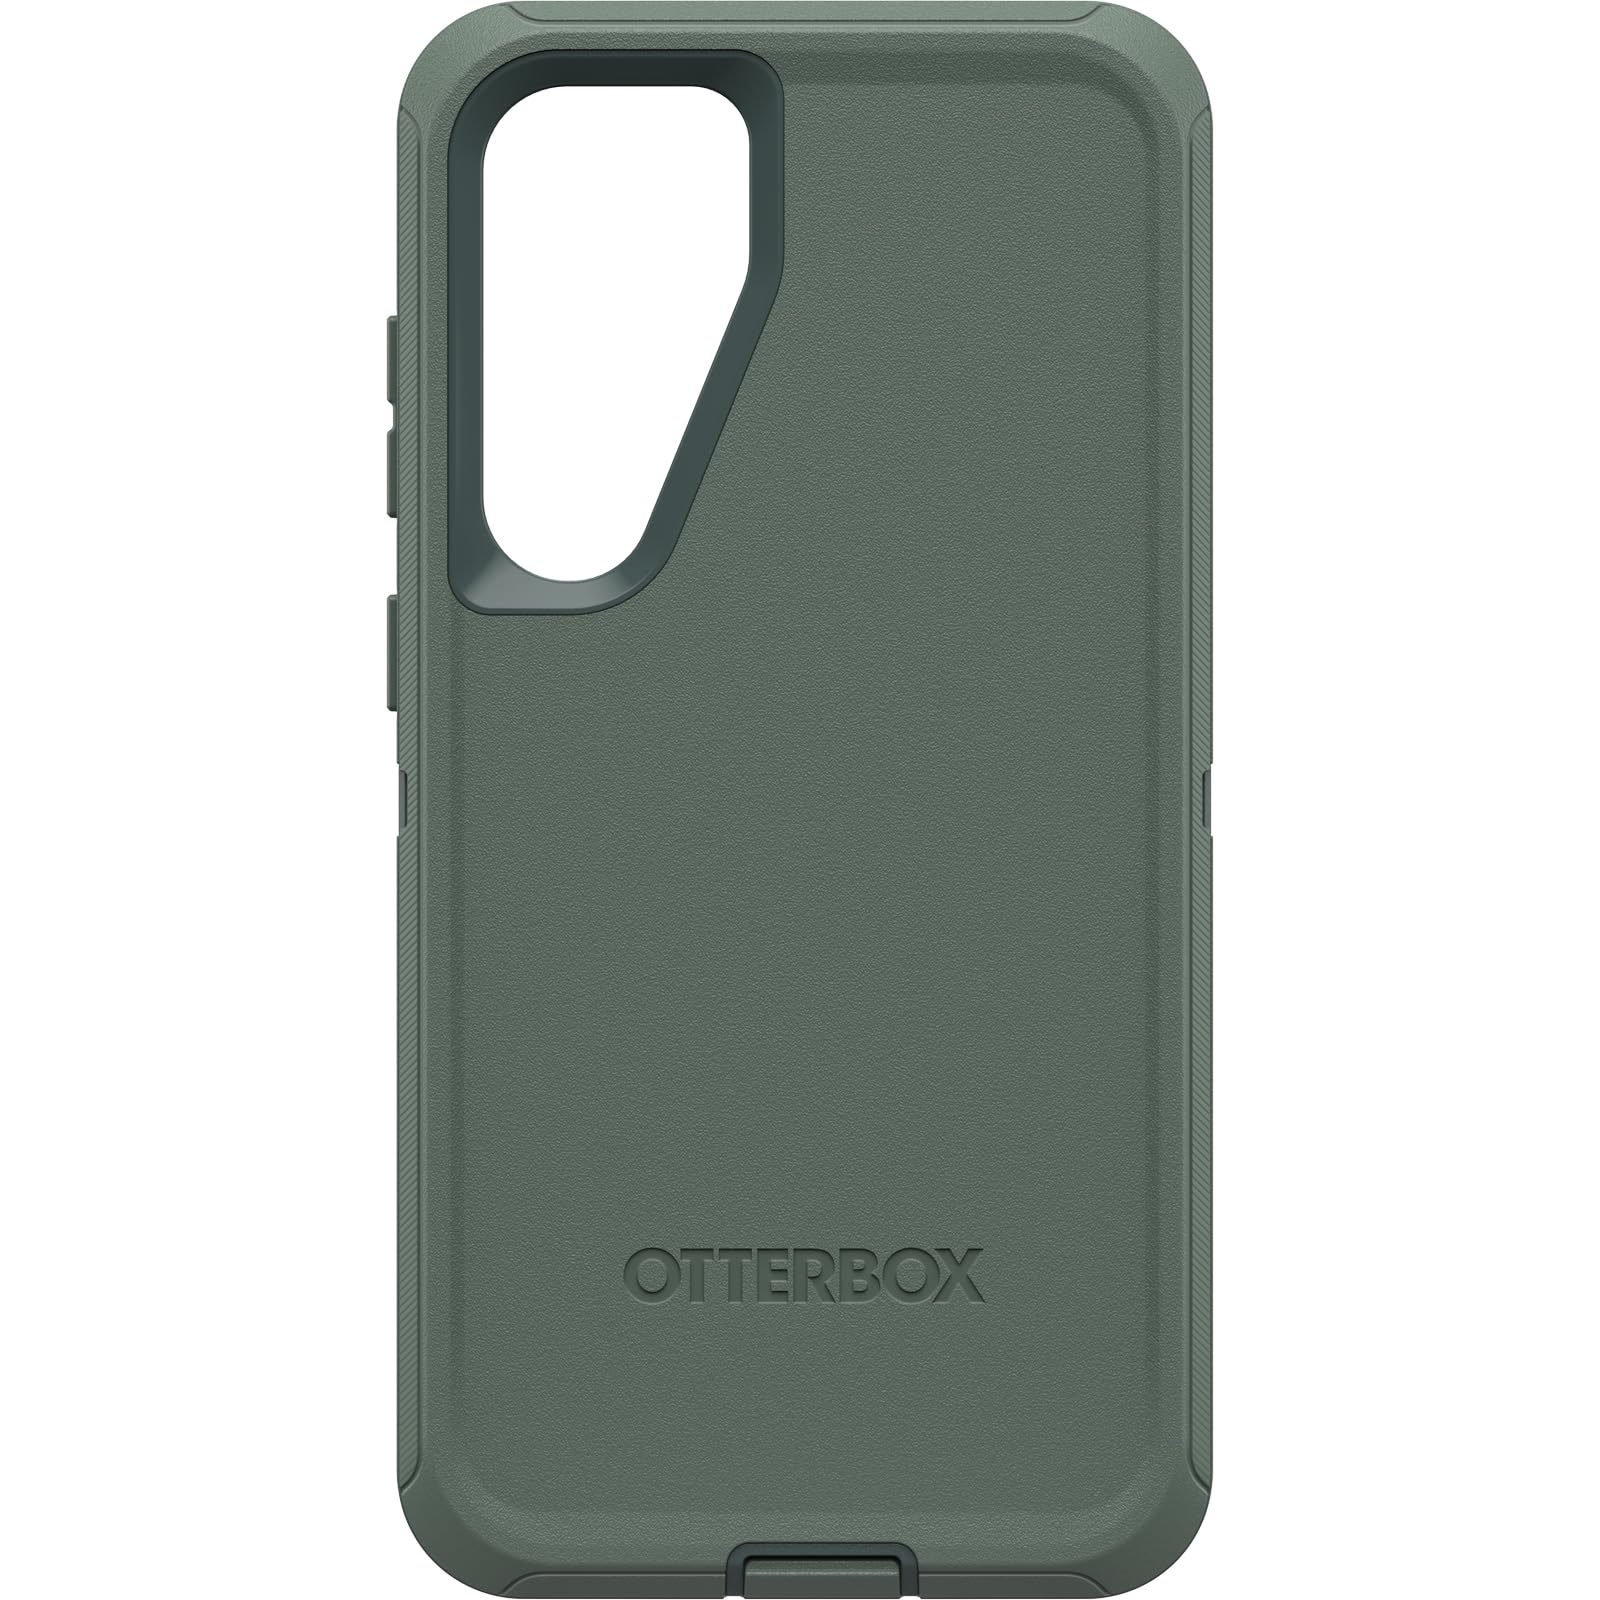 OtterBox Samsung Galaxy S24+ Defender Series Case - Forest Ranger (Green), Rugged & Durable, with Port Protection, Includes Holster Clip Kickstand